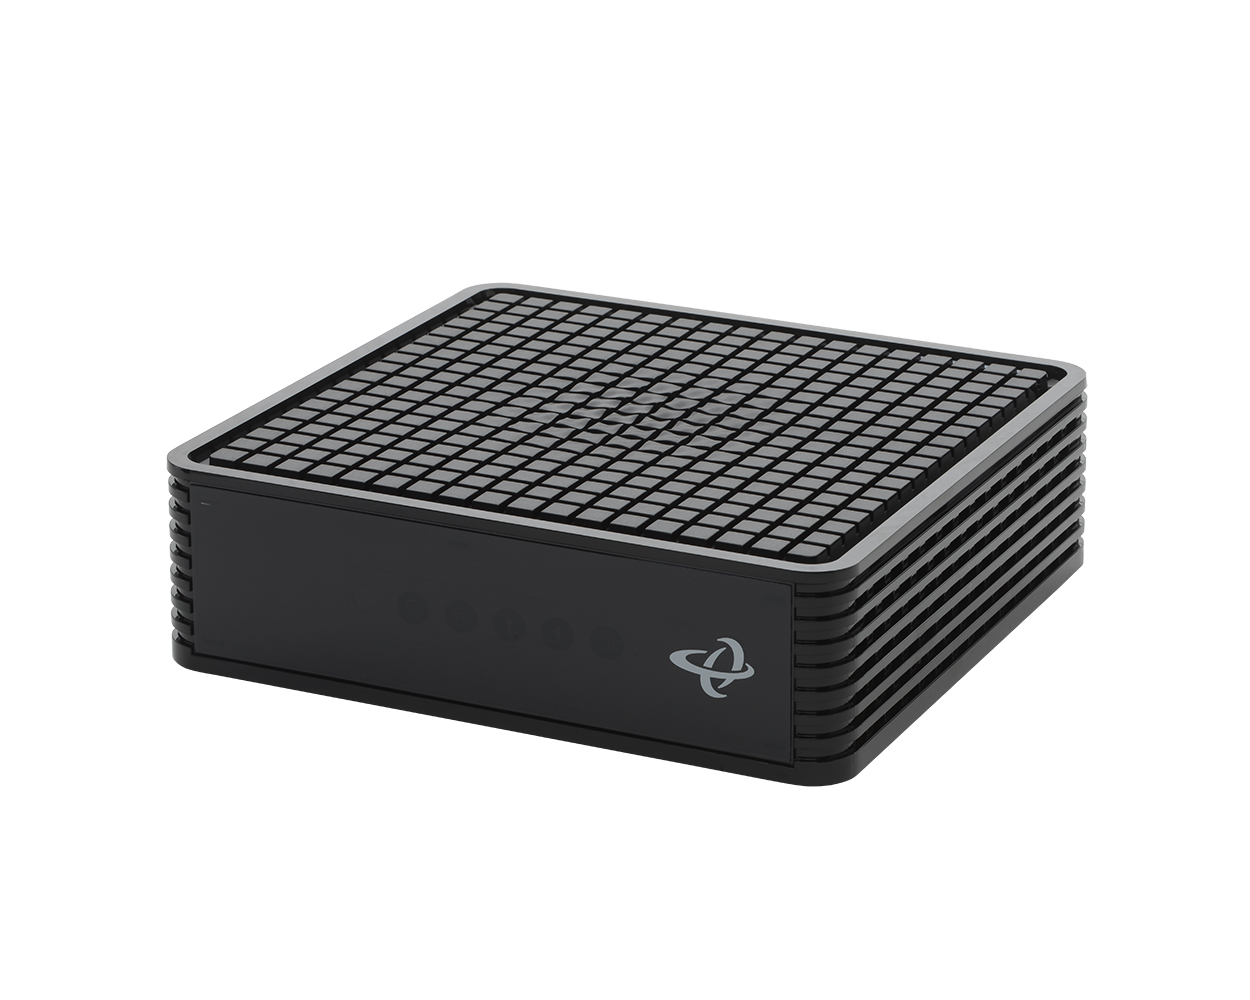 DOCSIS 3.1 Cable Modem from Hitron - CODA45